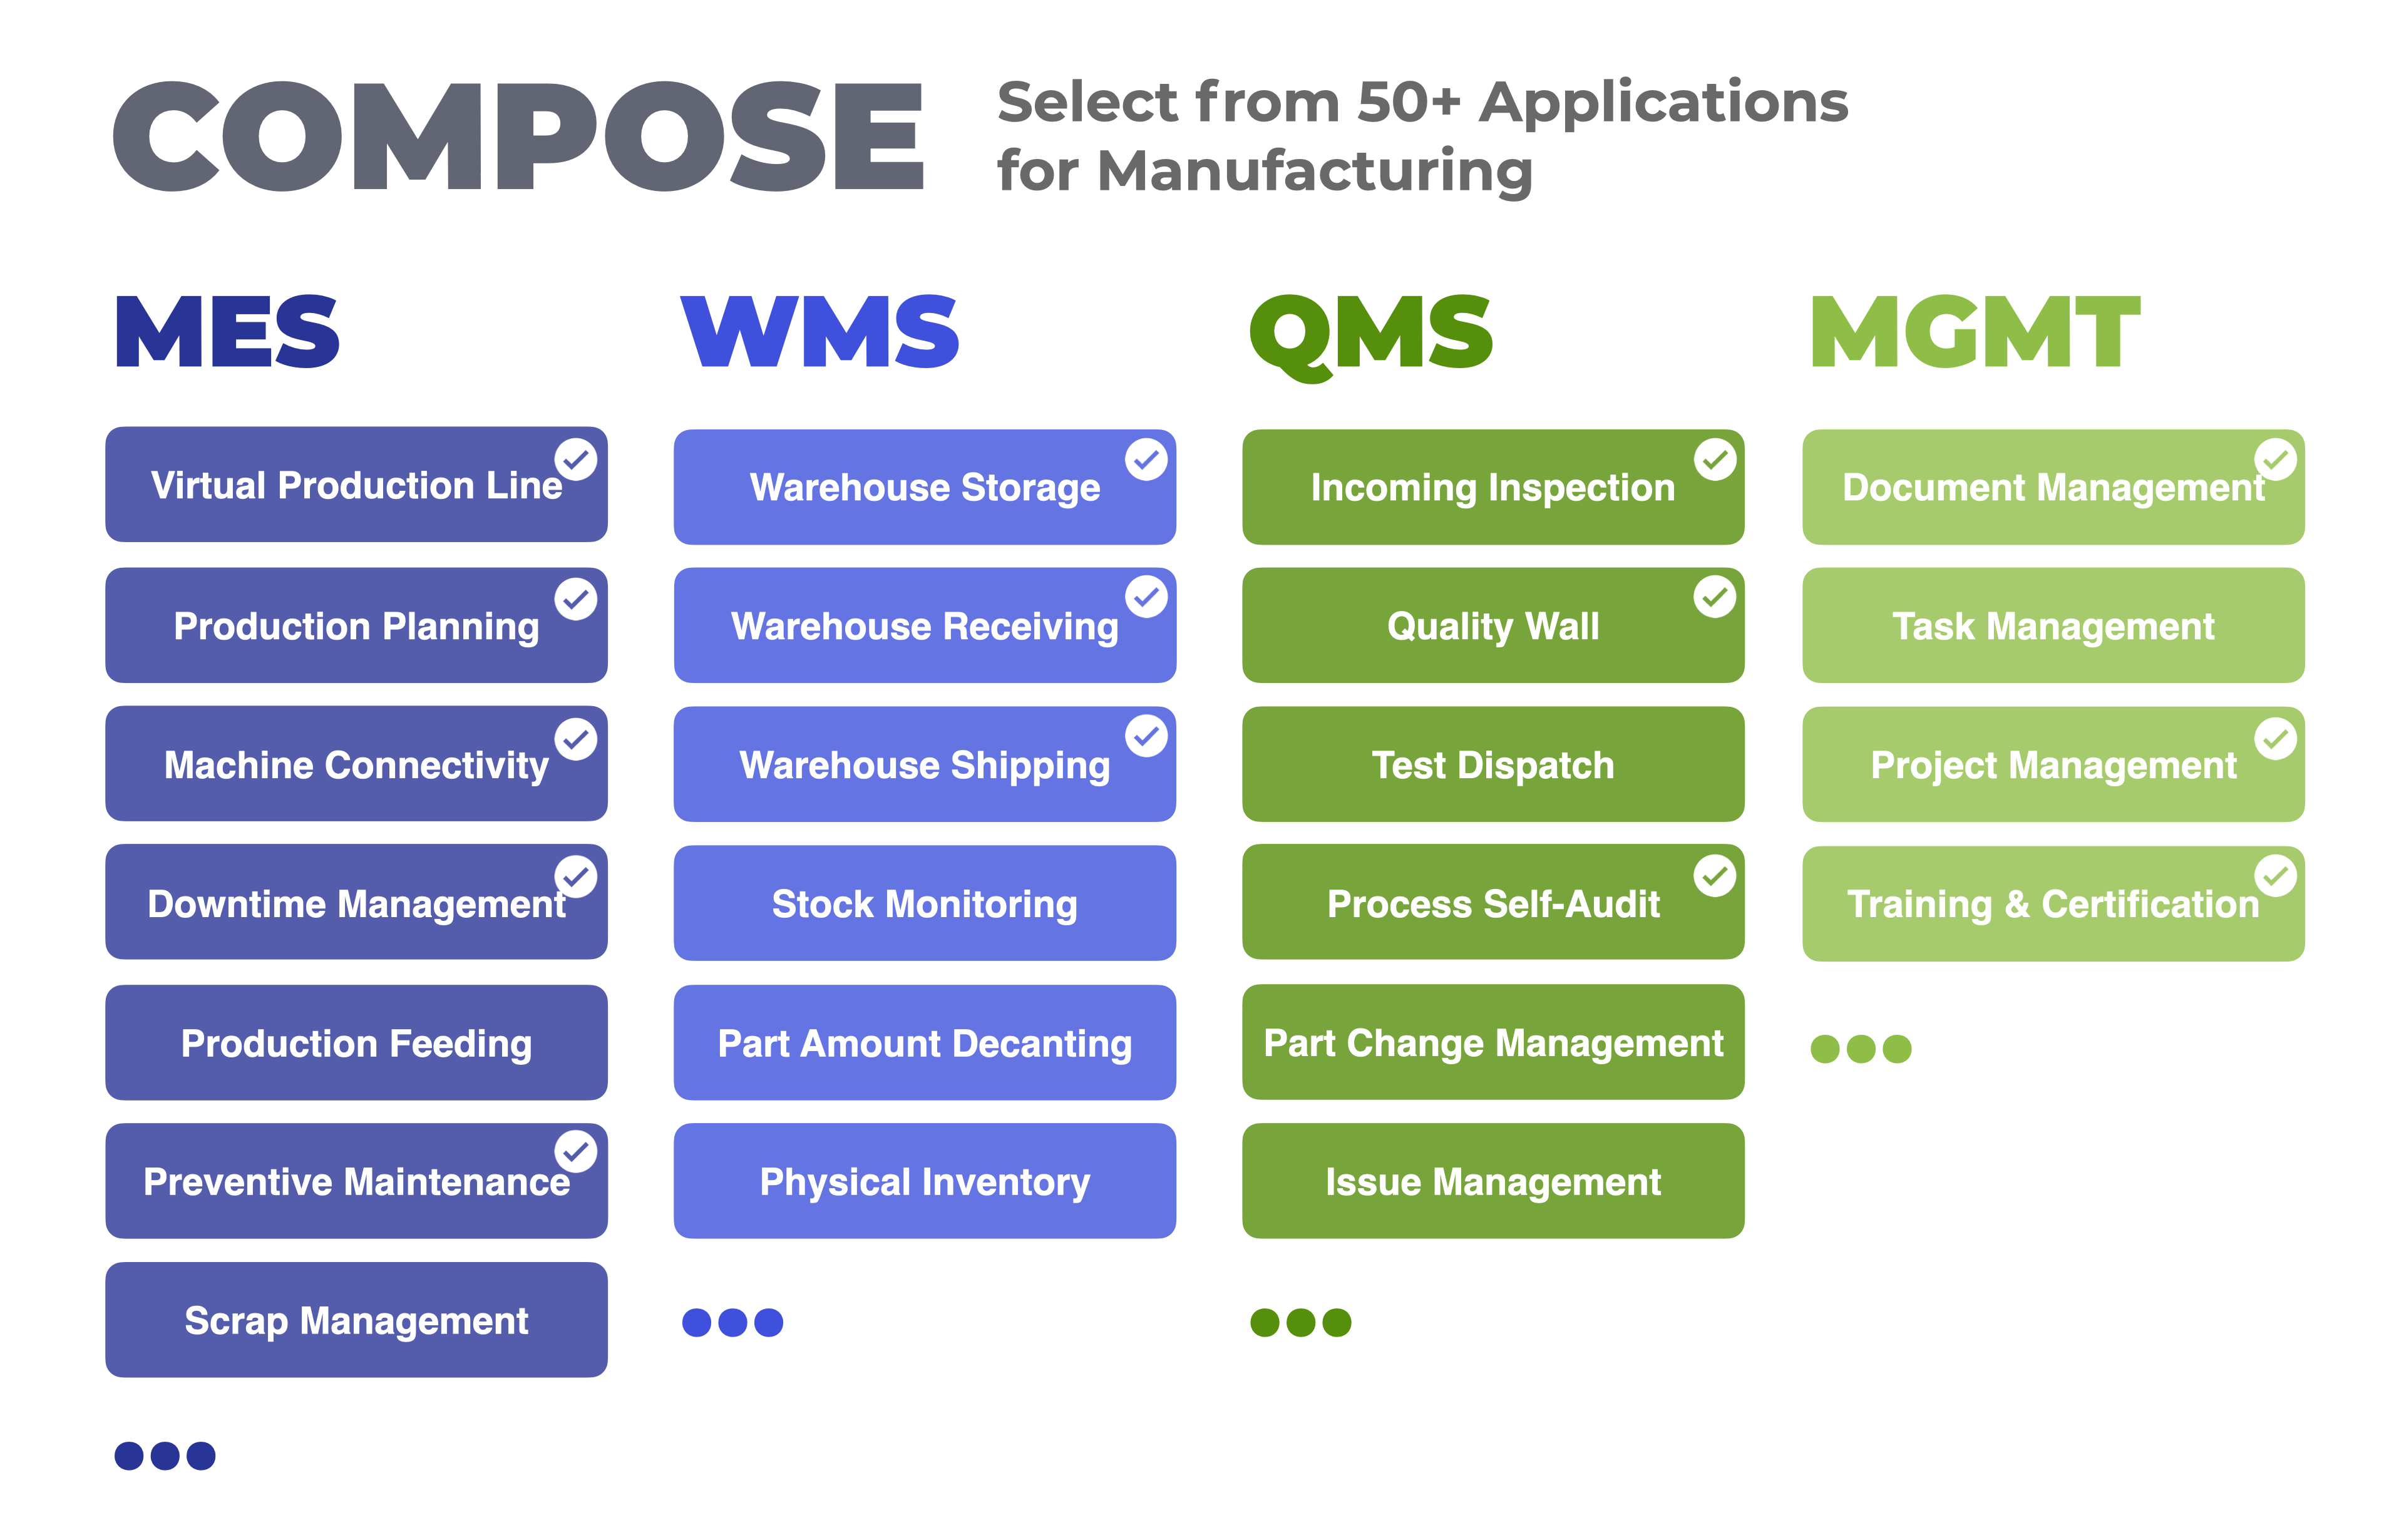 Select from 50+ Applications for Manufacturing